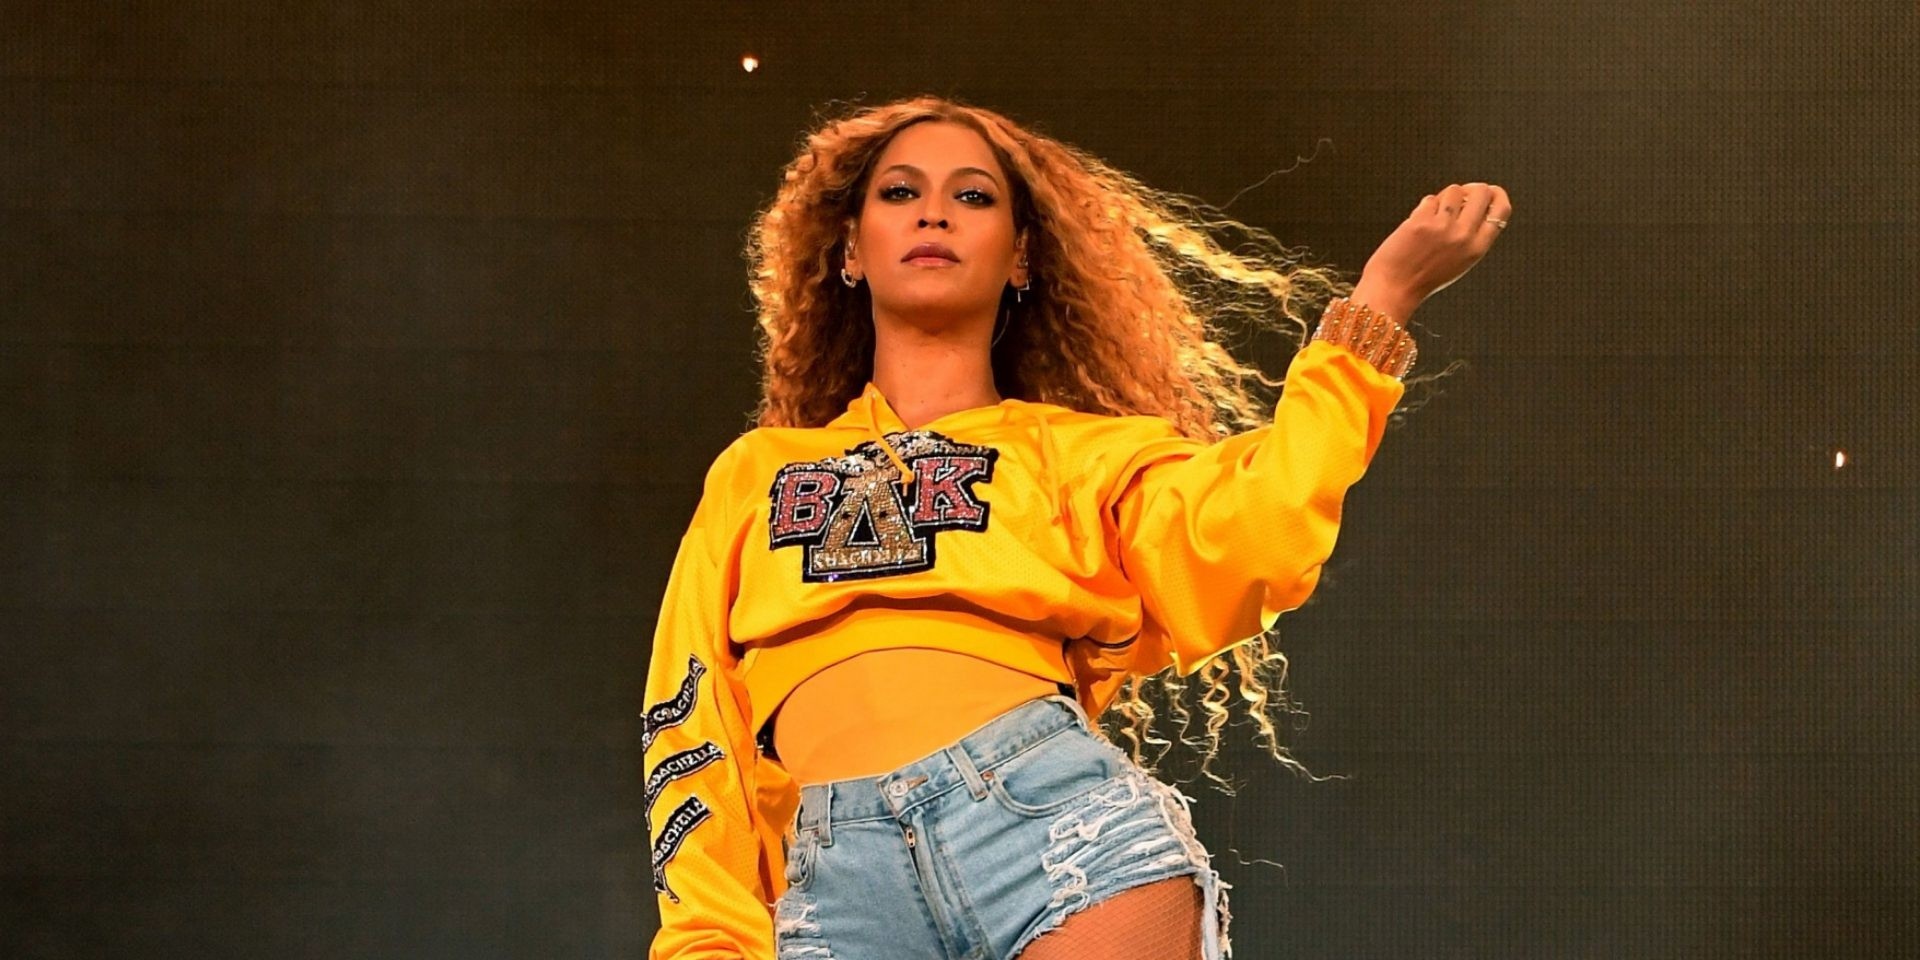 Beyoncé's Coachella 2018 concert film Homecoming is now streaming on Netflix